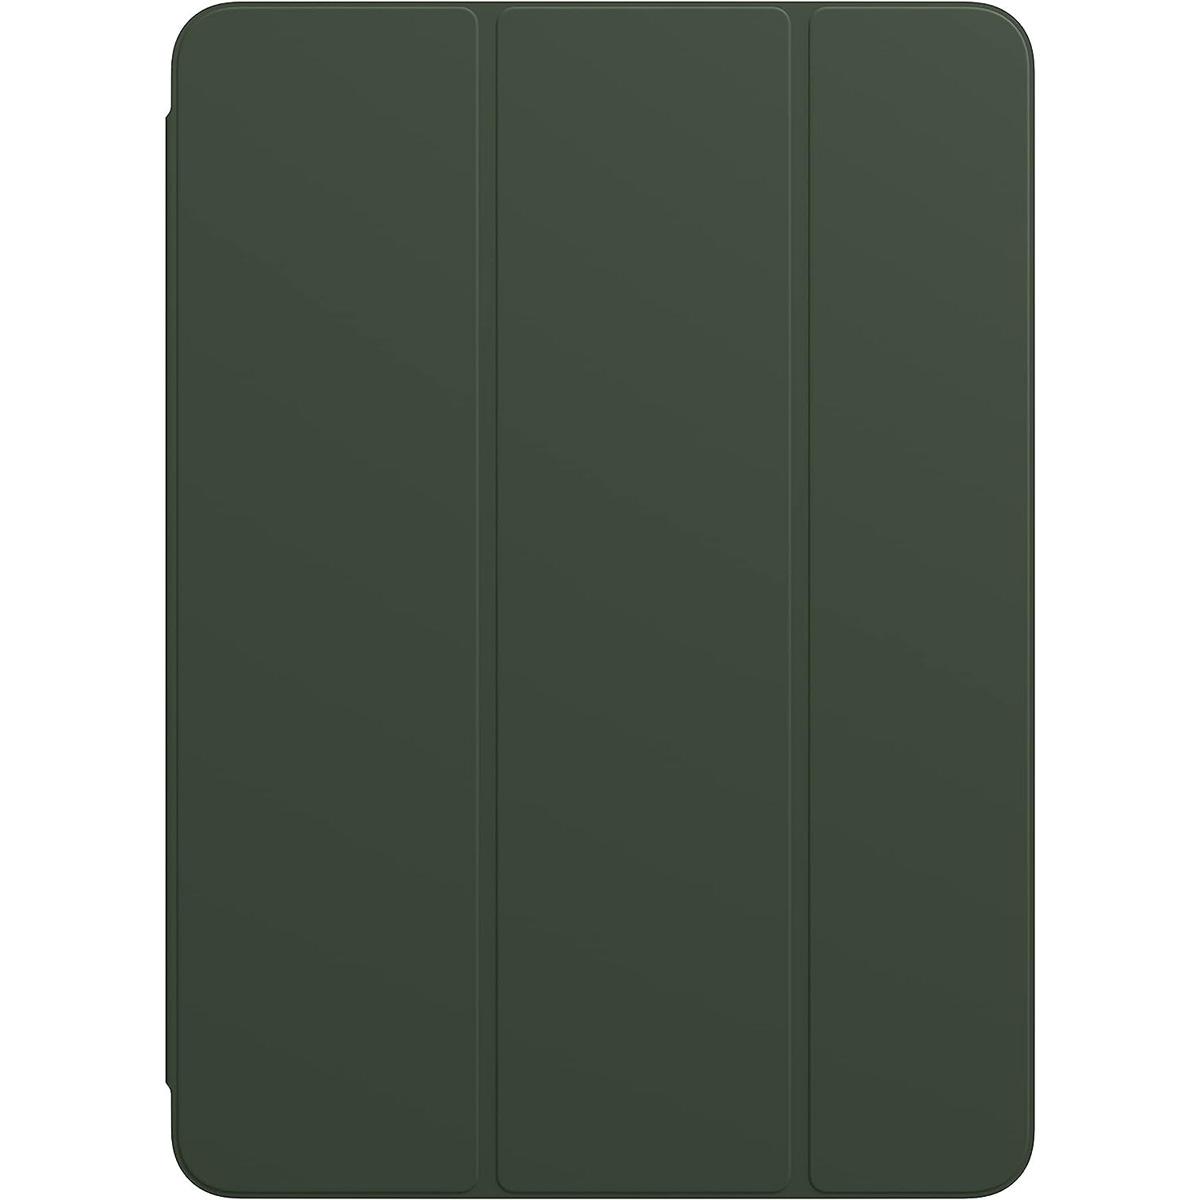 Apple Smart Folio for 11in iPad Pro and iPad Air for $19.99